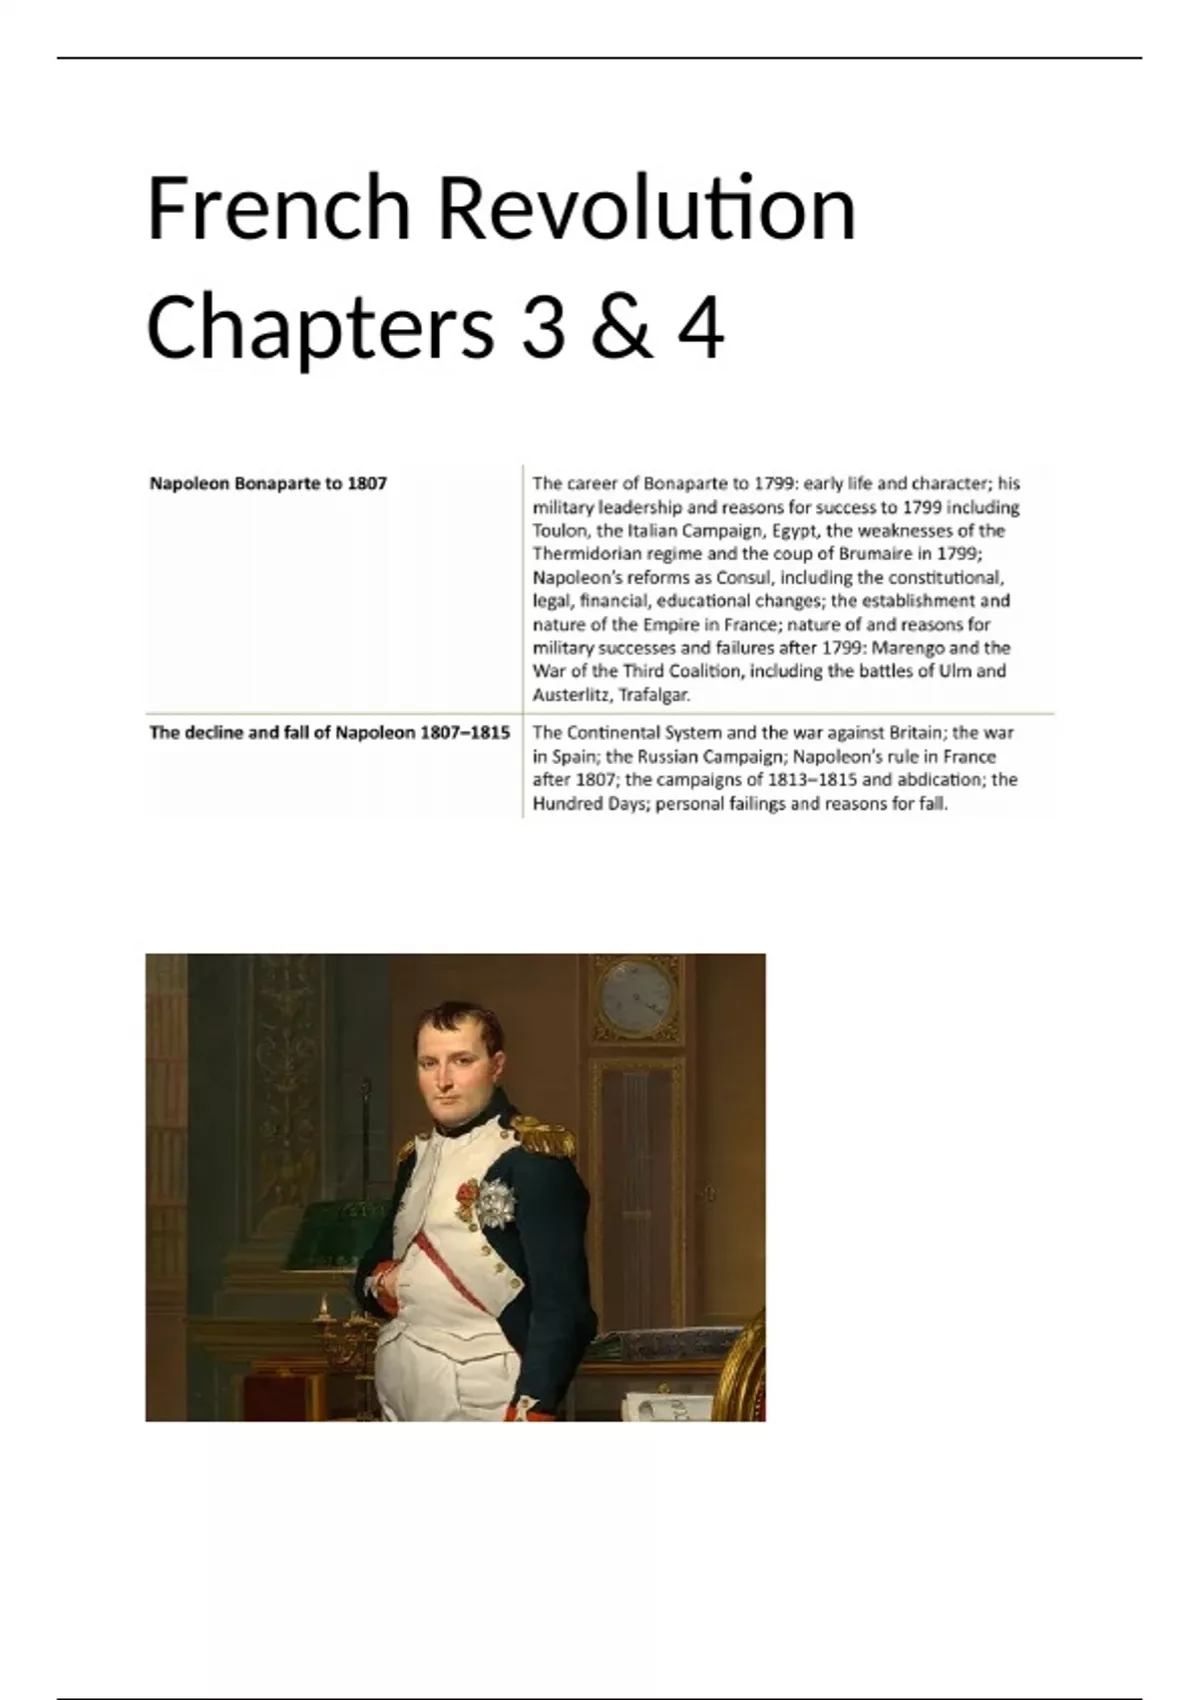 a level history french revolution coursework